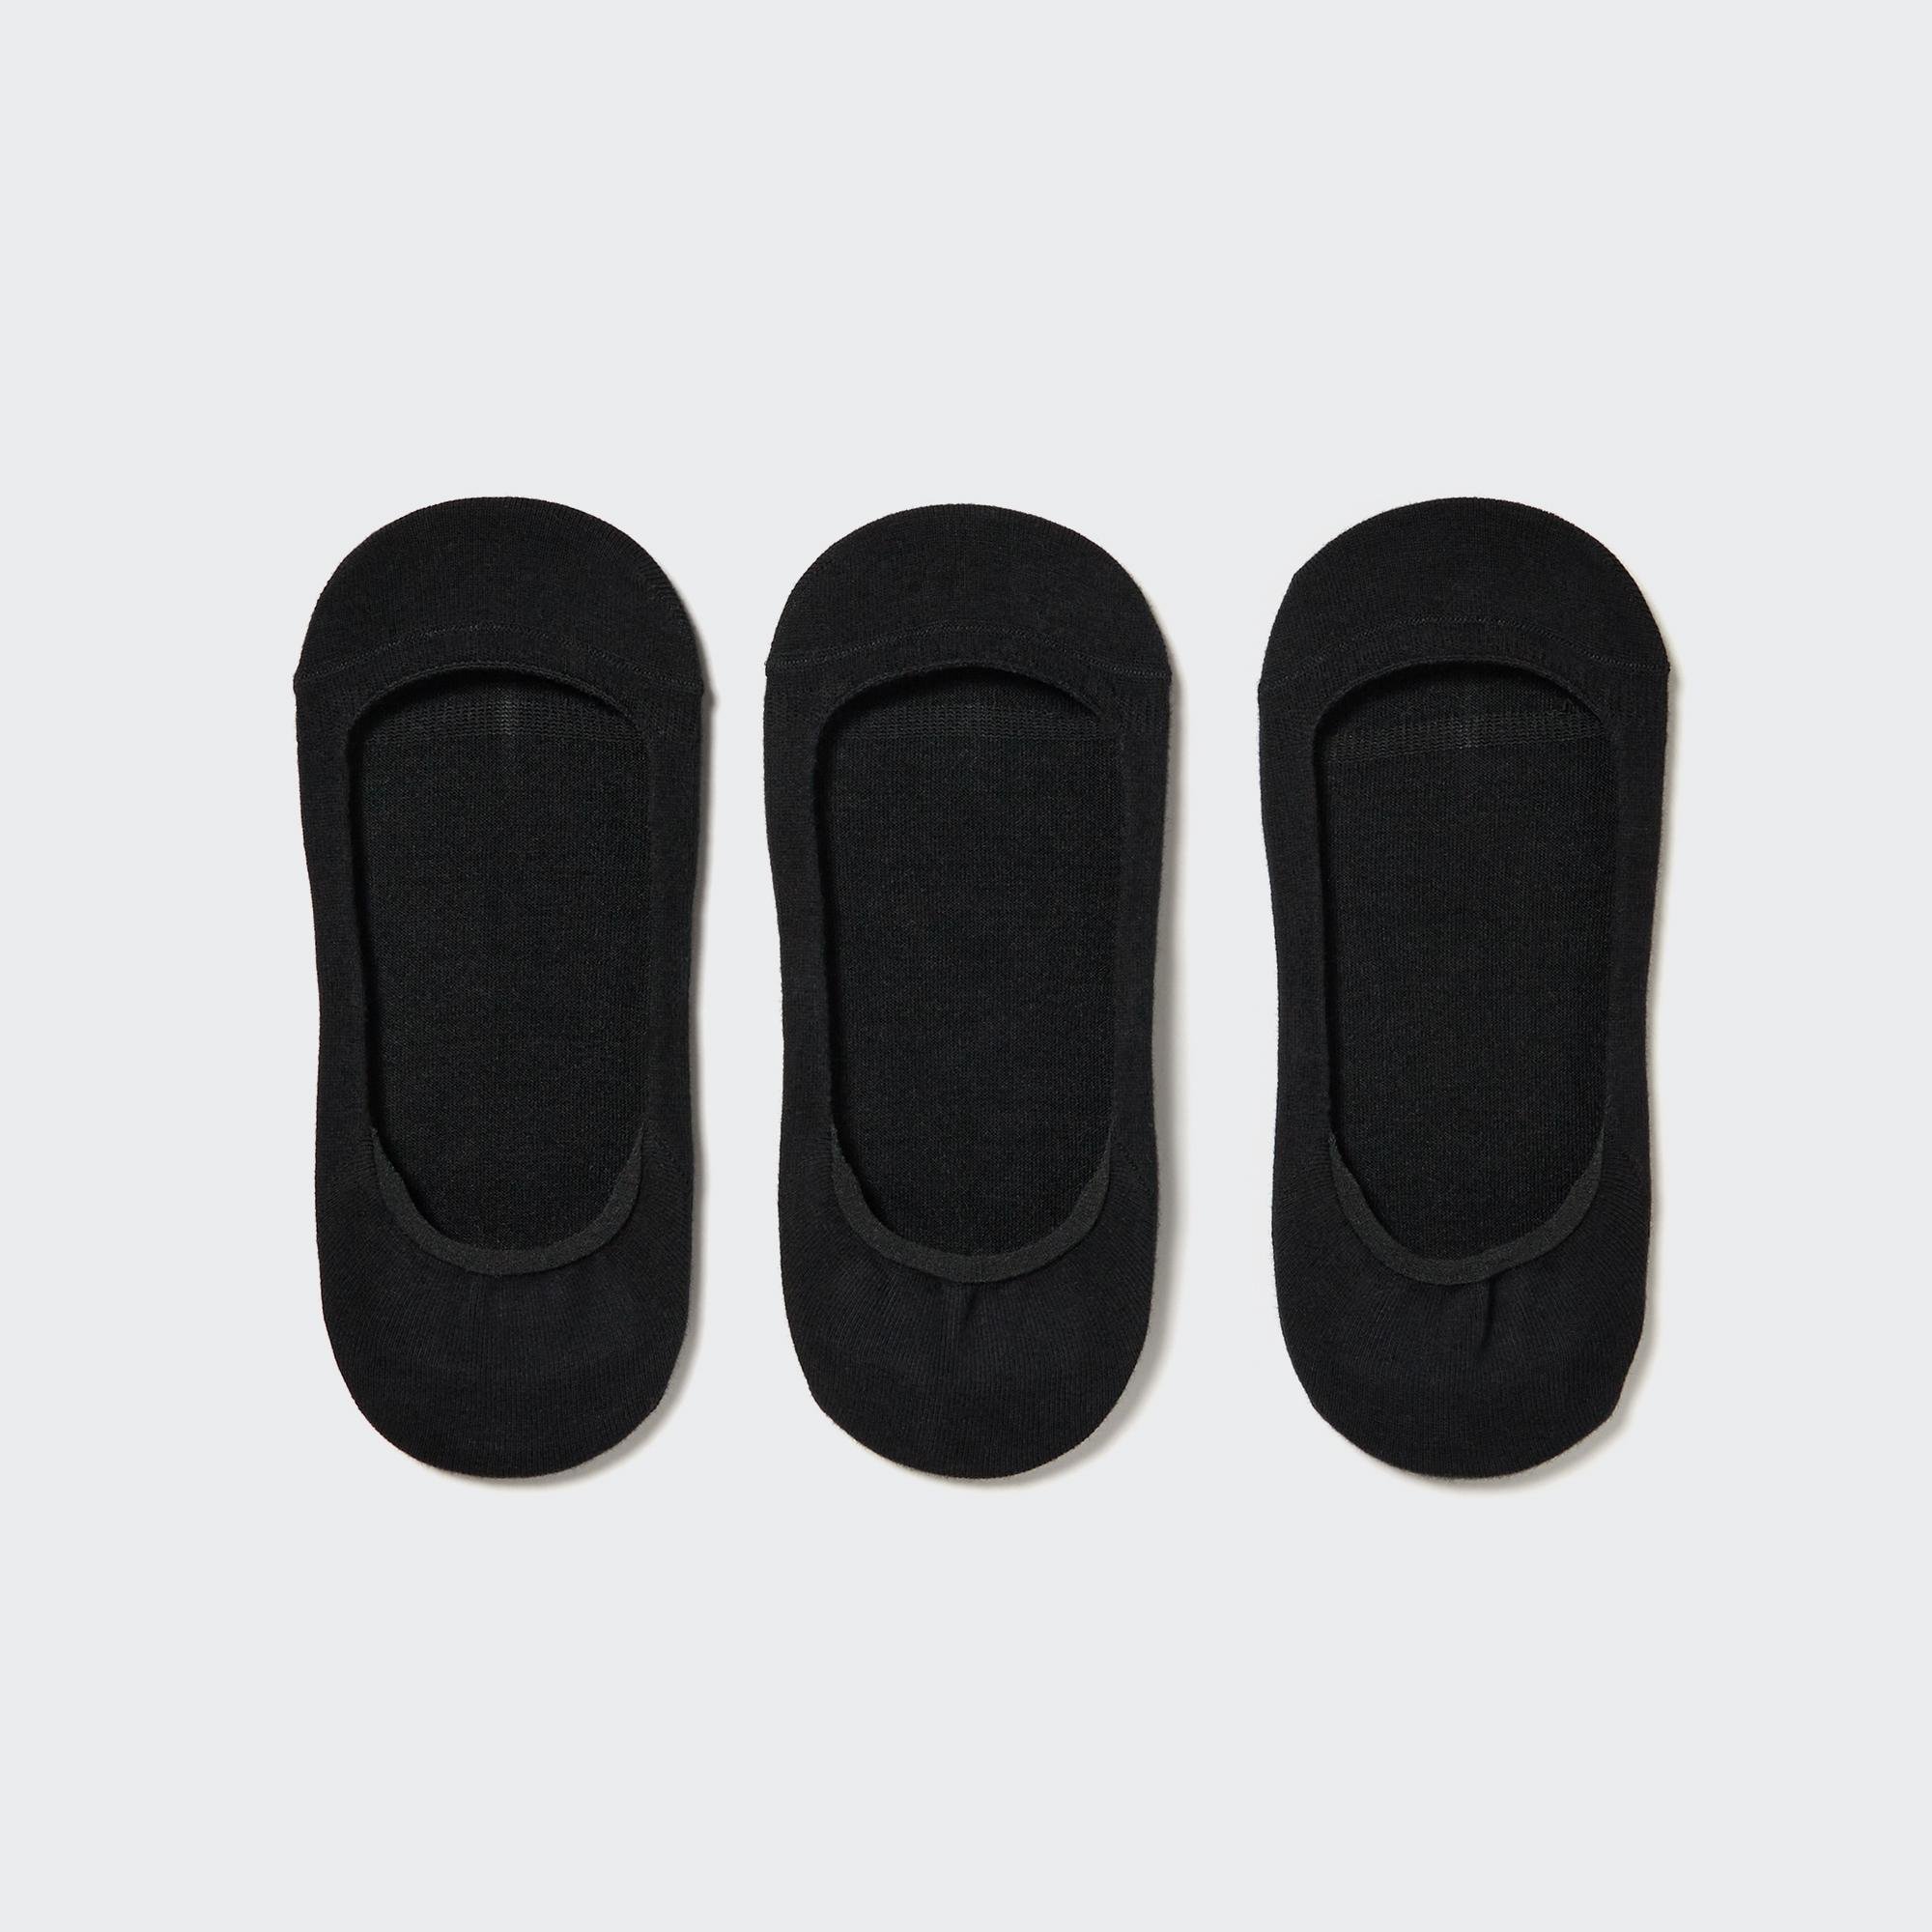 Footsies 3 Pack (Low Cut) by UNIQLO